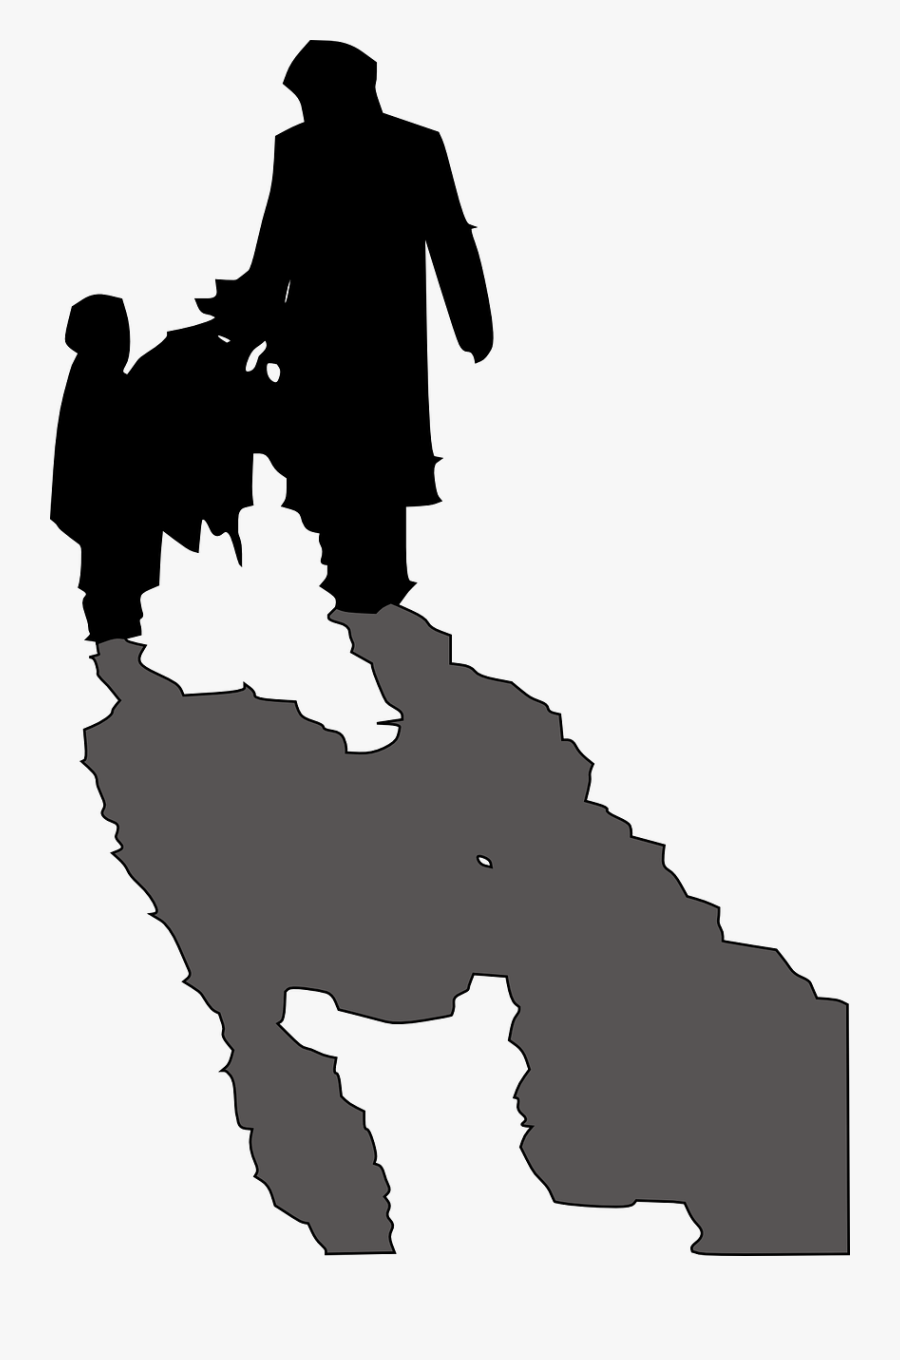 Dad Father Silhouette Free Picture - Carrying A Christmas Tree Silhouette, Transparent Clipart